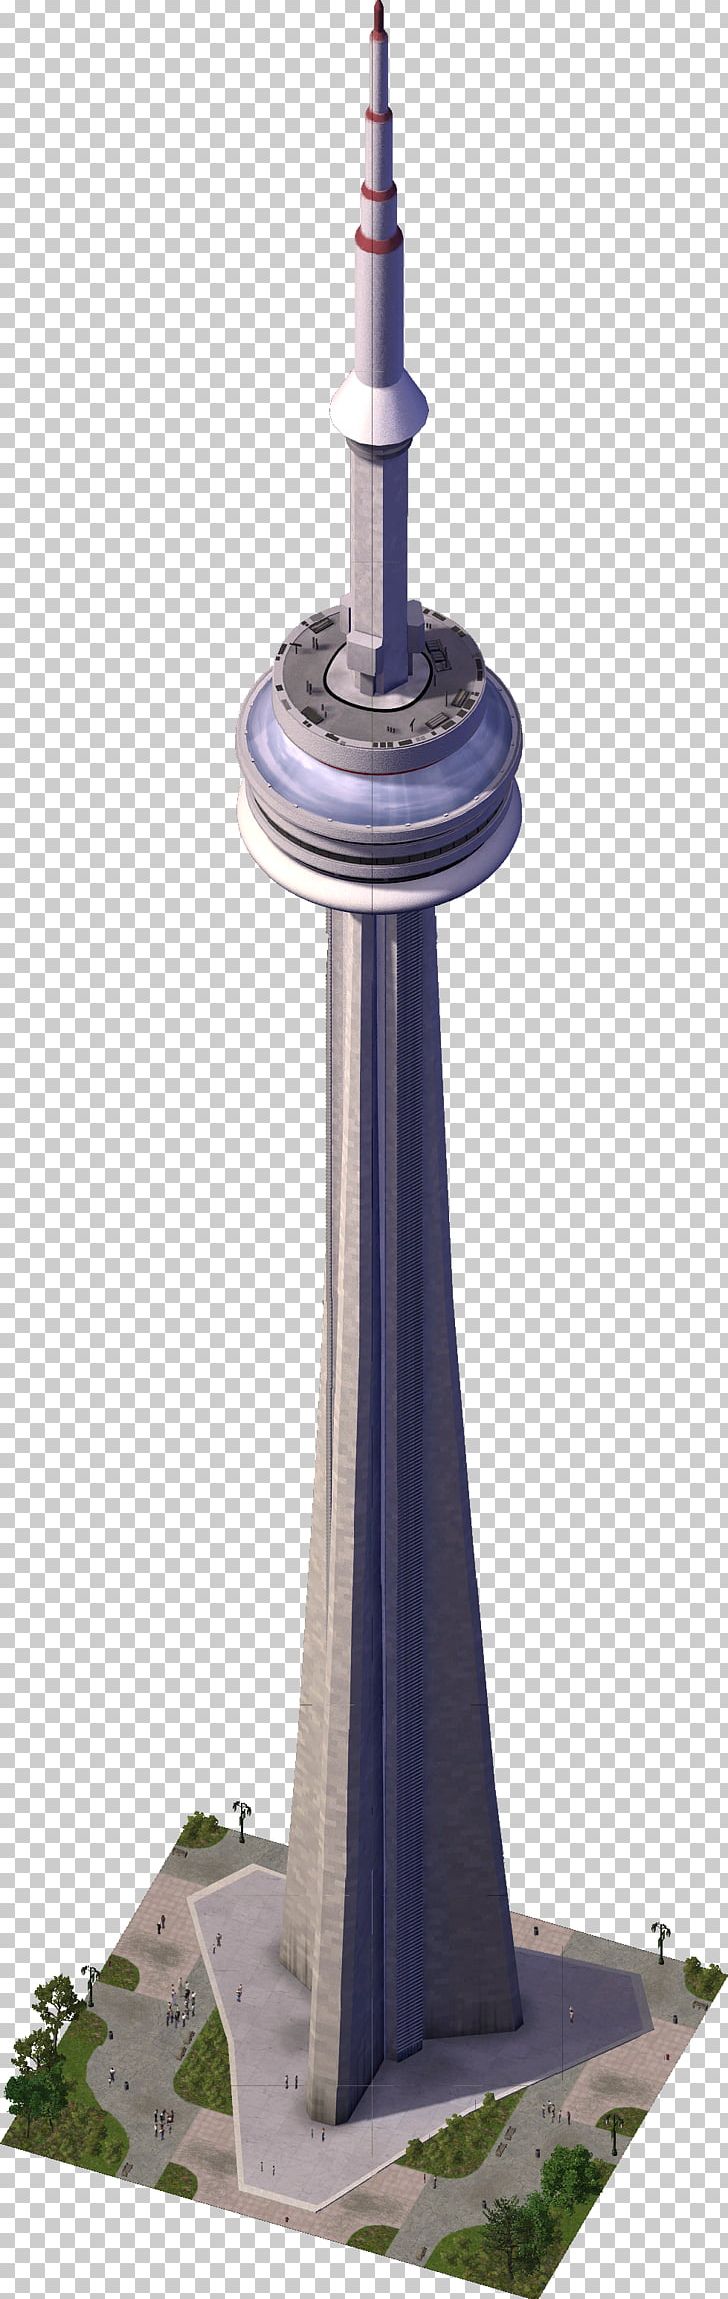 CN Tower Willis Tower Eiffel Tower PNG, Clipart, Cn Tower, Computer Software, Eiffel Tower, Header, Image File Formats Free PNG Download